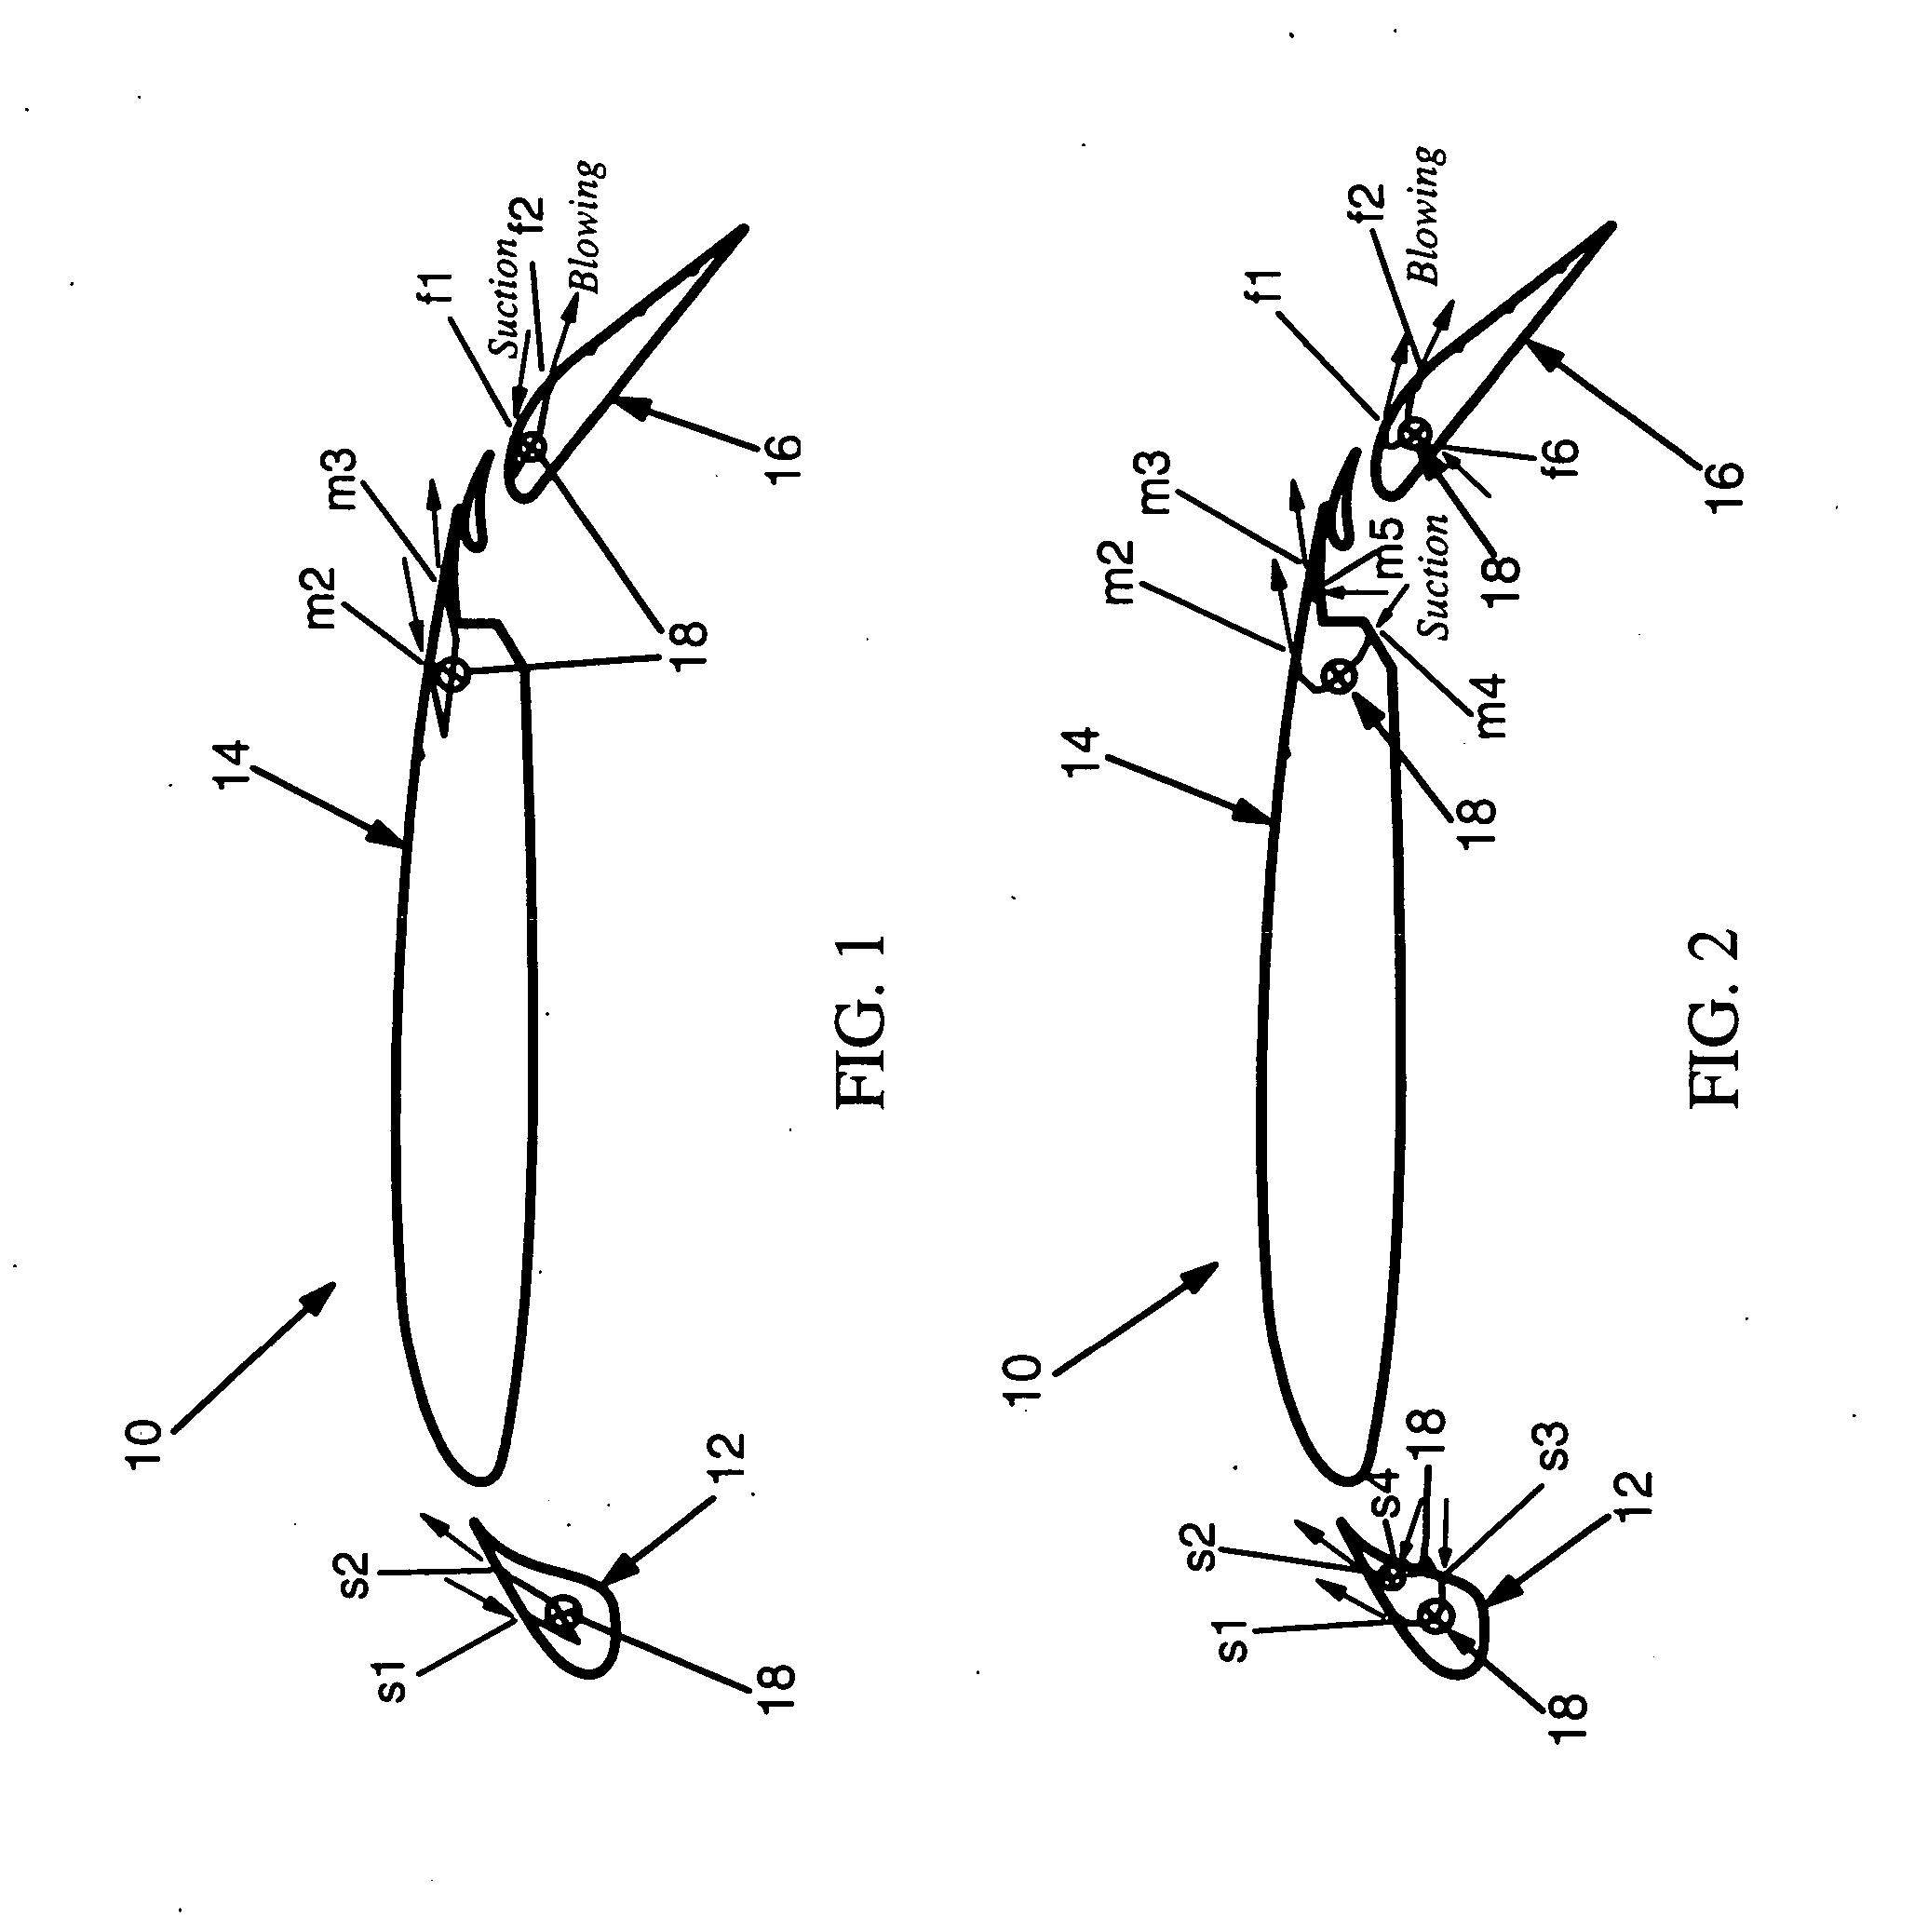 System for aerodynamic flows and associated method